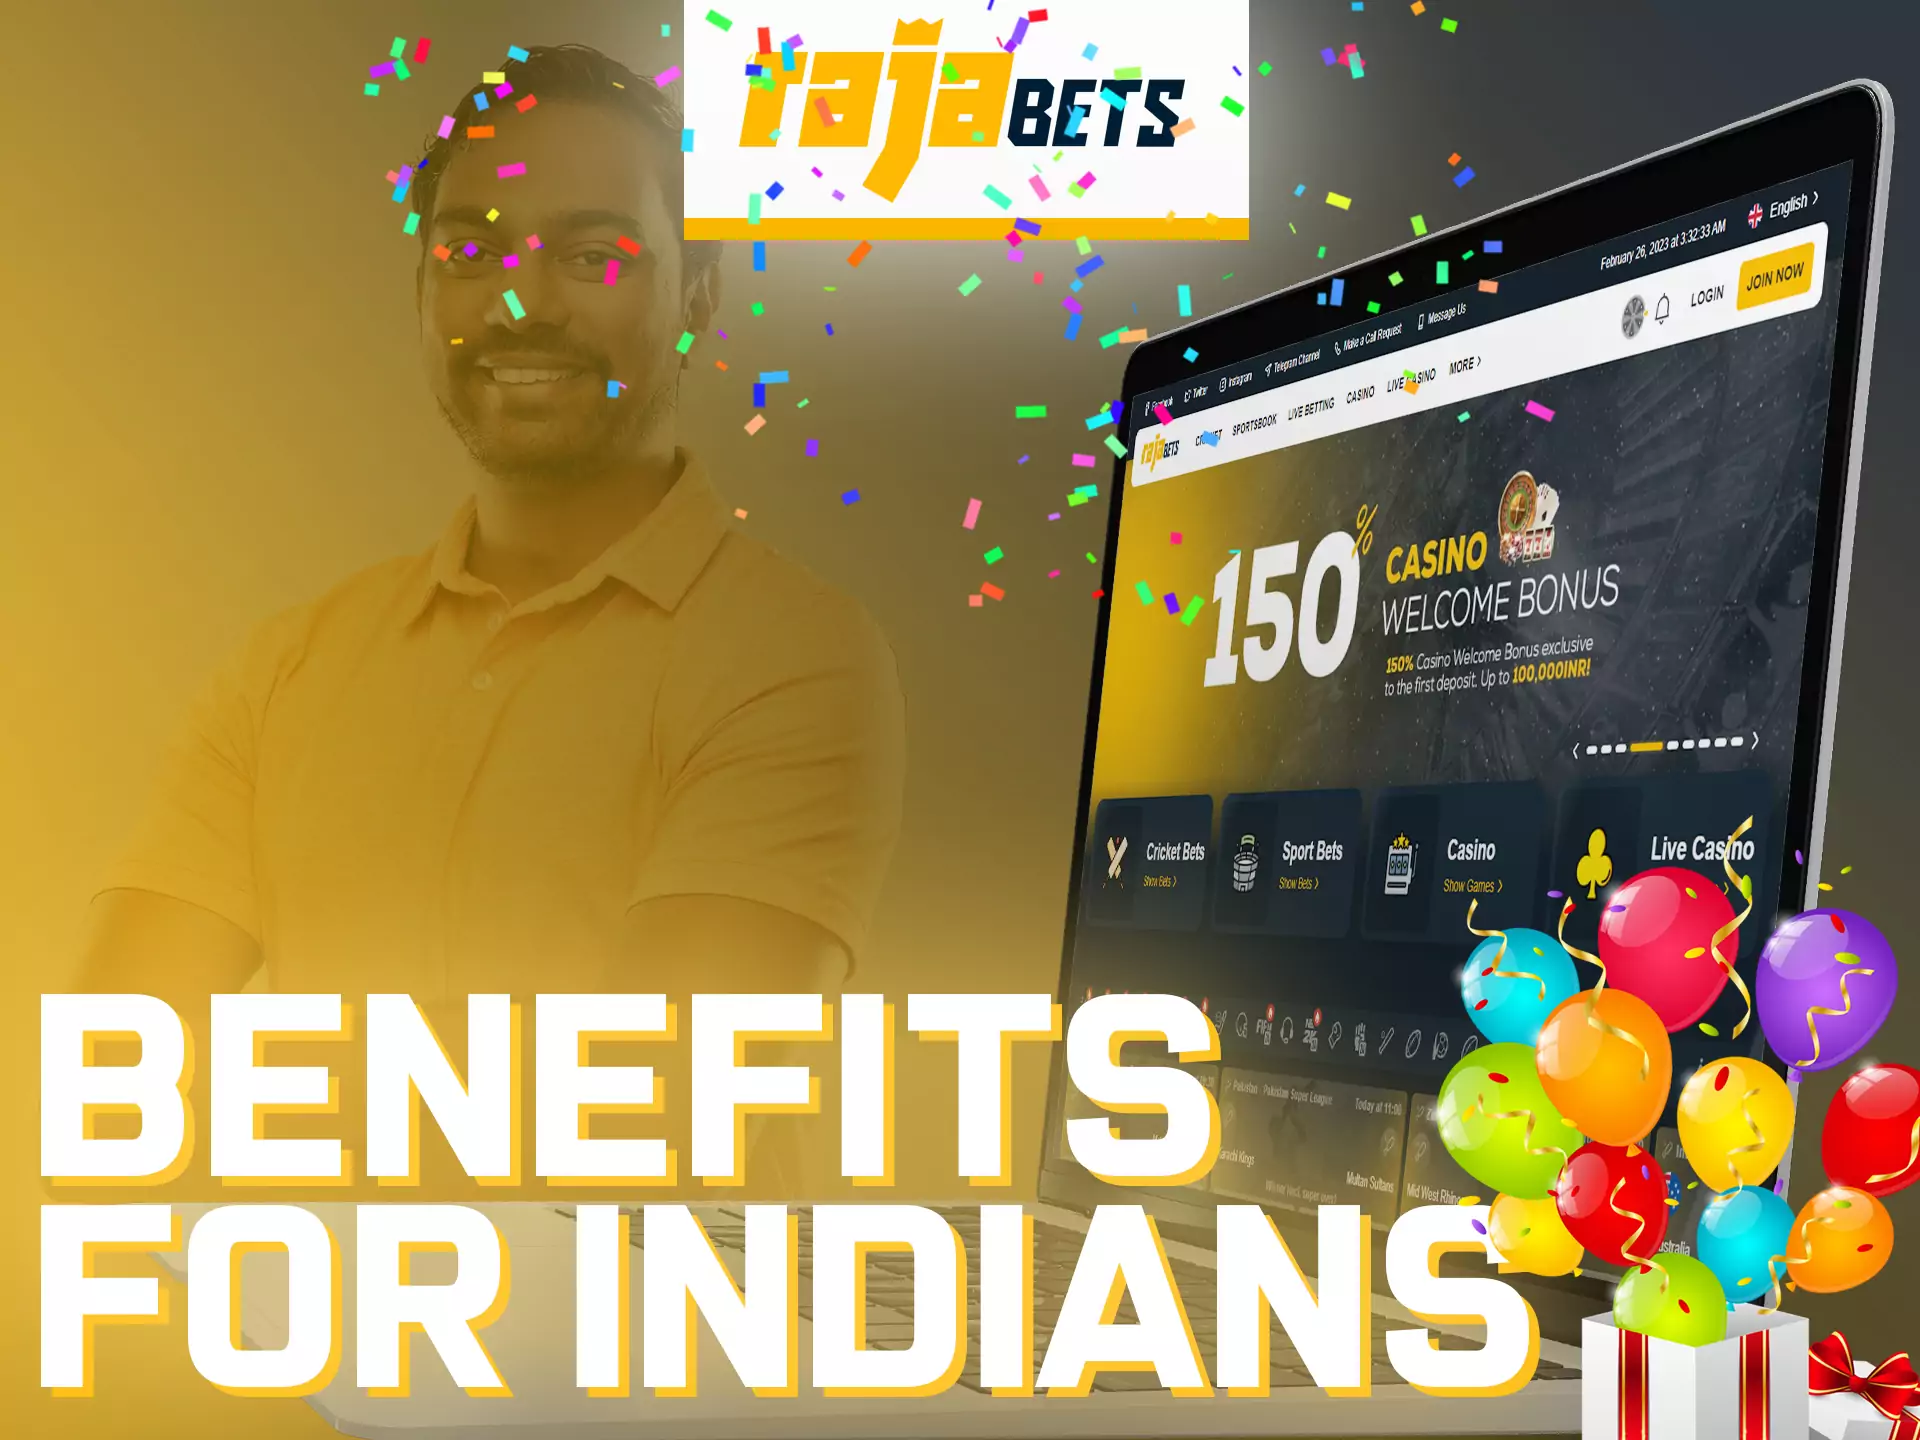 Rajabets offers many benefits and bonuses to its players from India.